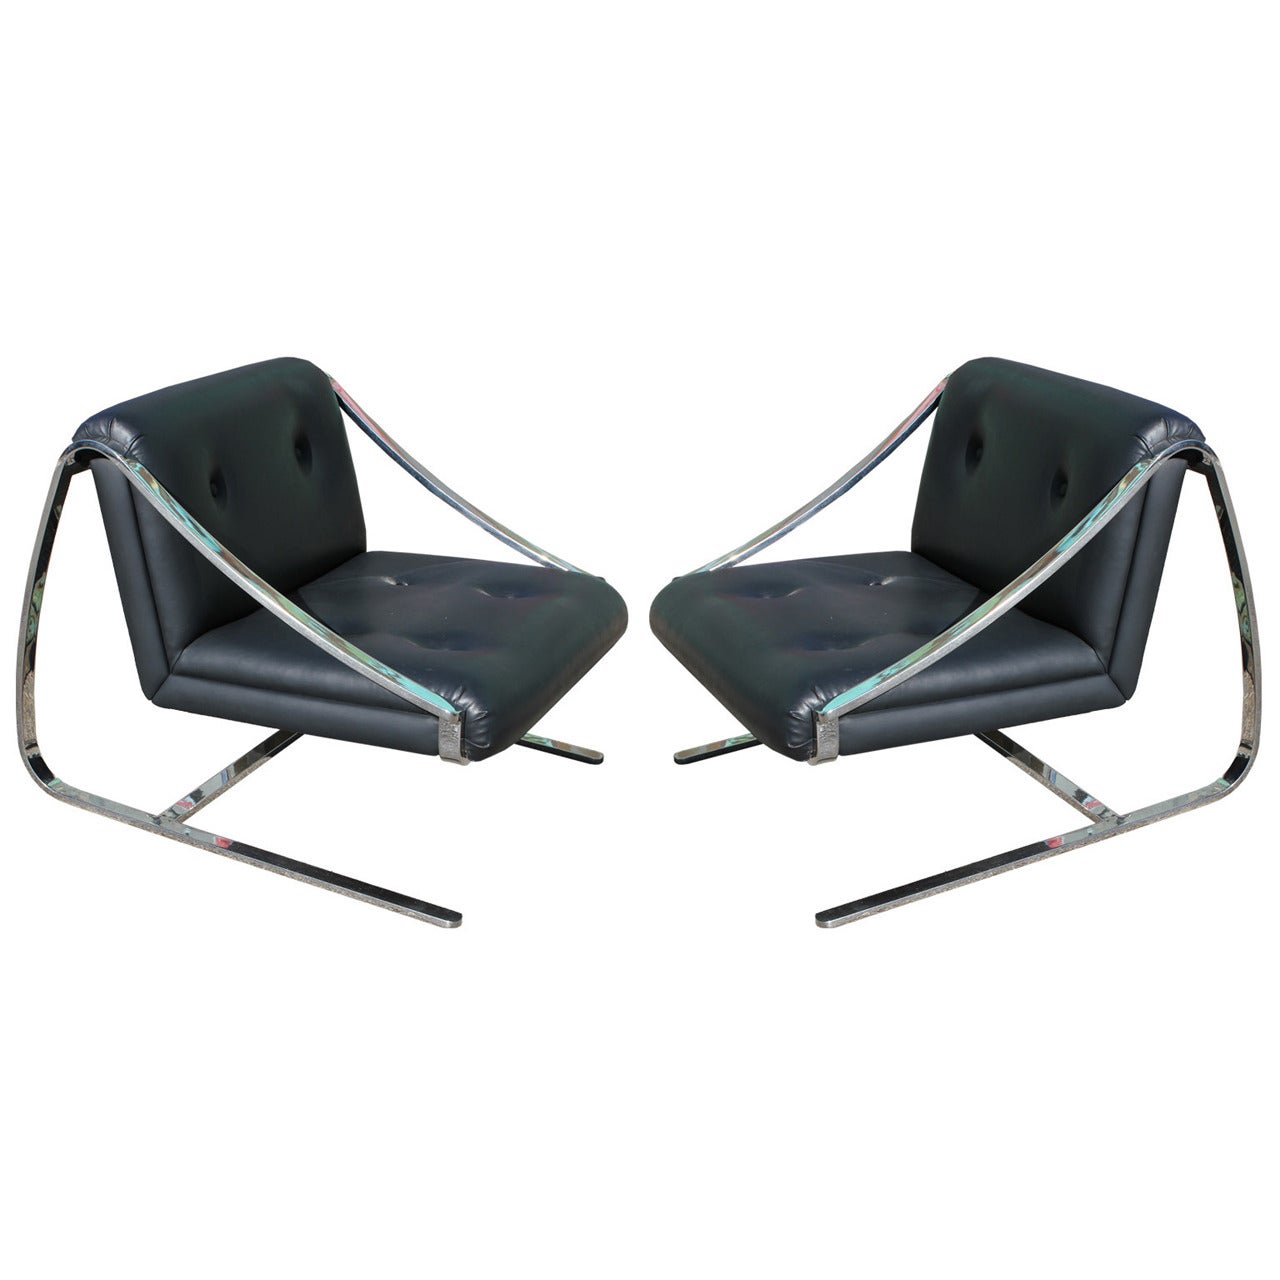 Luxe Pair of Cantilevered Brueton Plaza Lounge Chairs by Charles Gibilterra